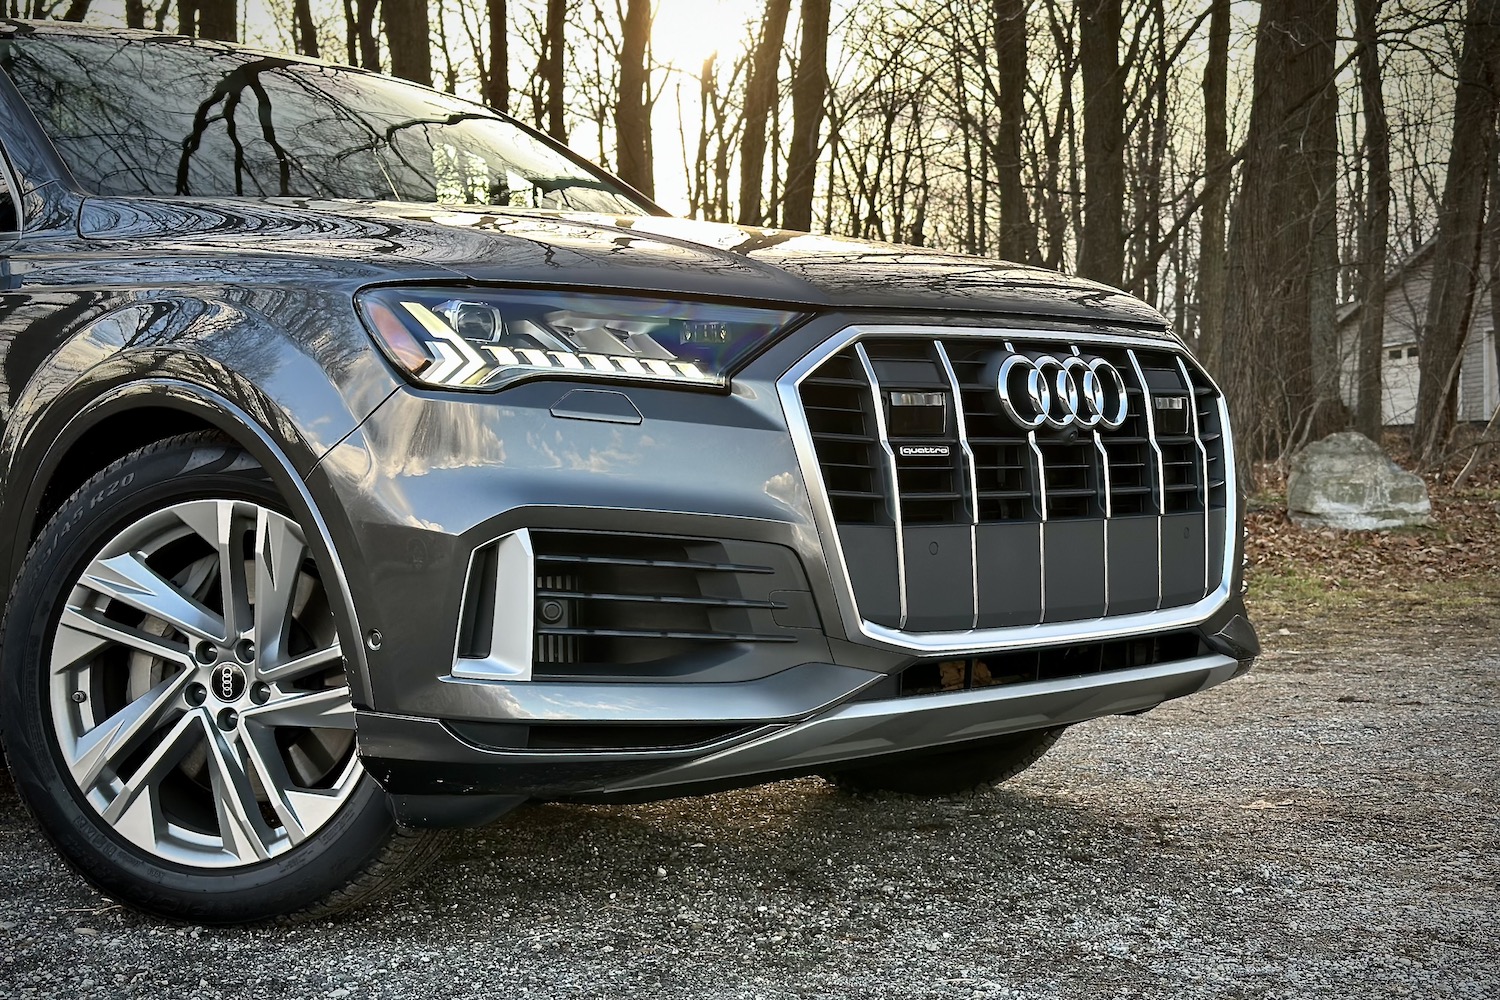 Close up shot of the 2022 Audi Q7 Prestige's front end parked on a gravel lot in front of trees.